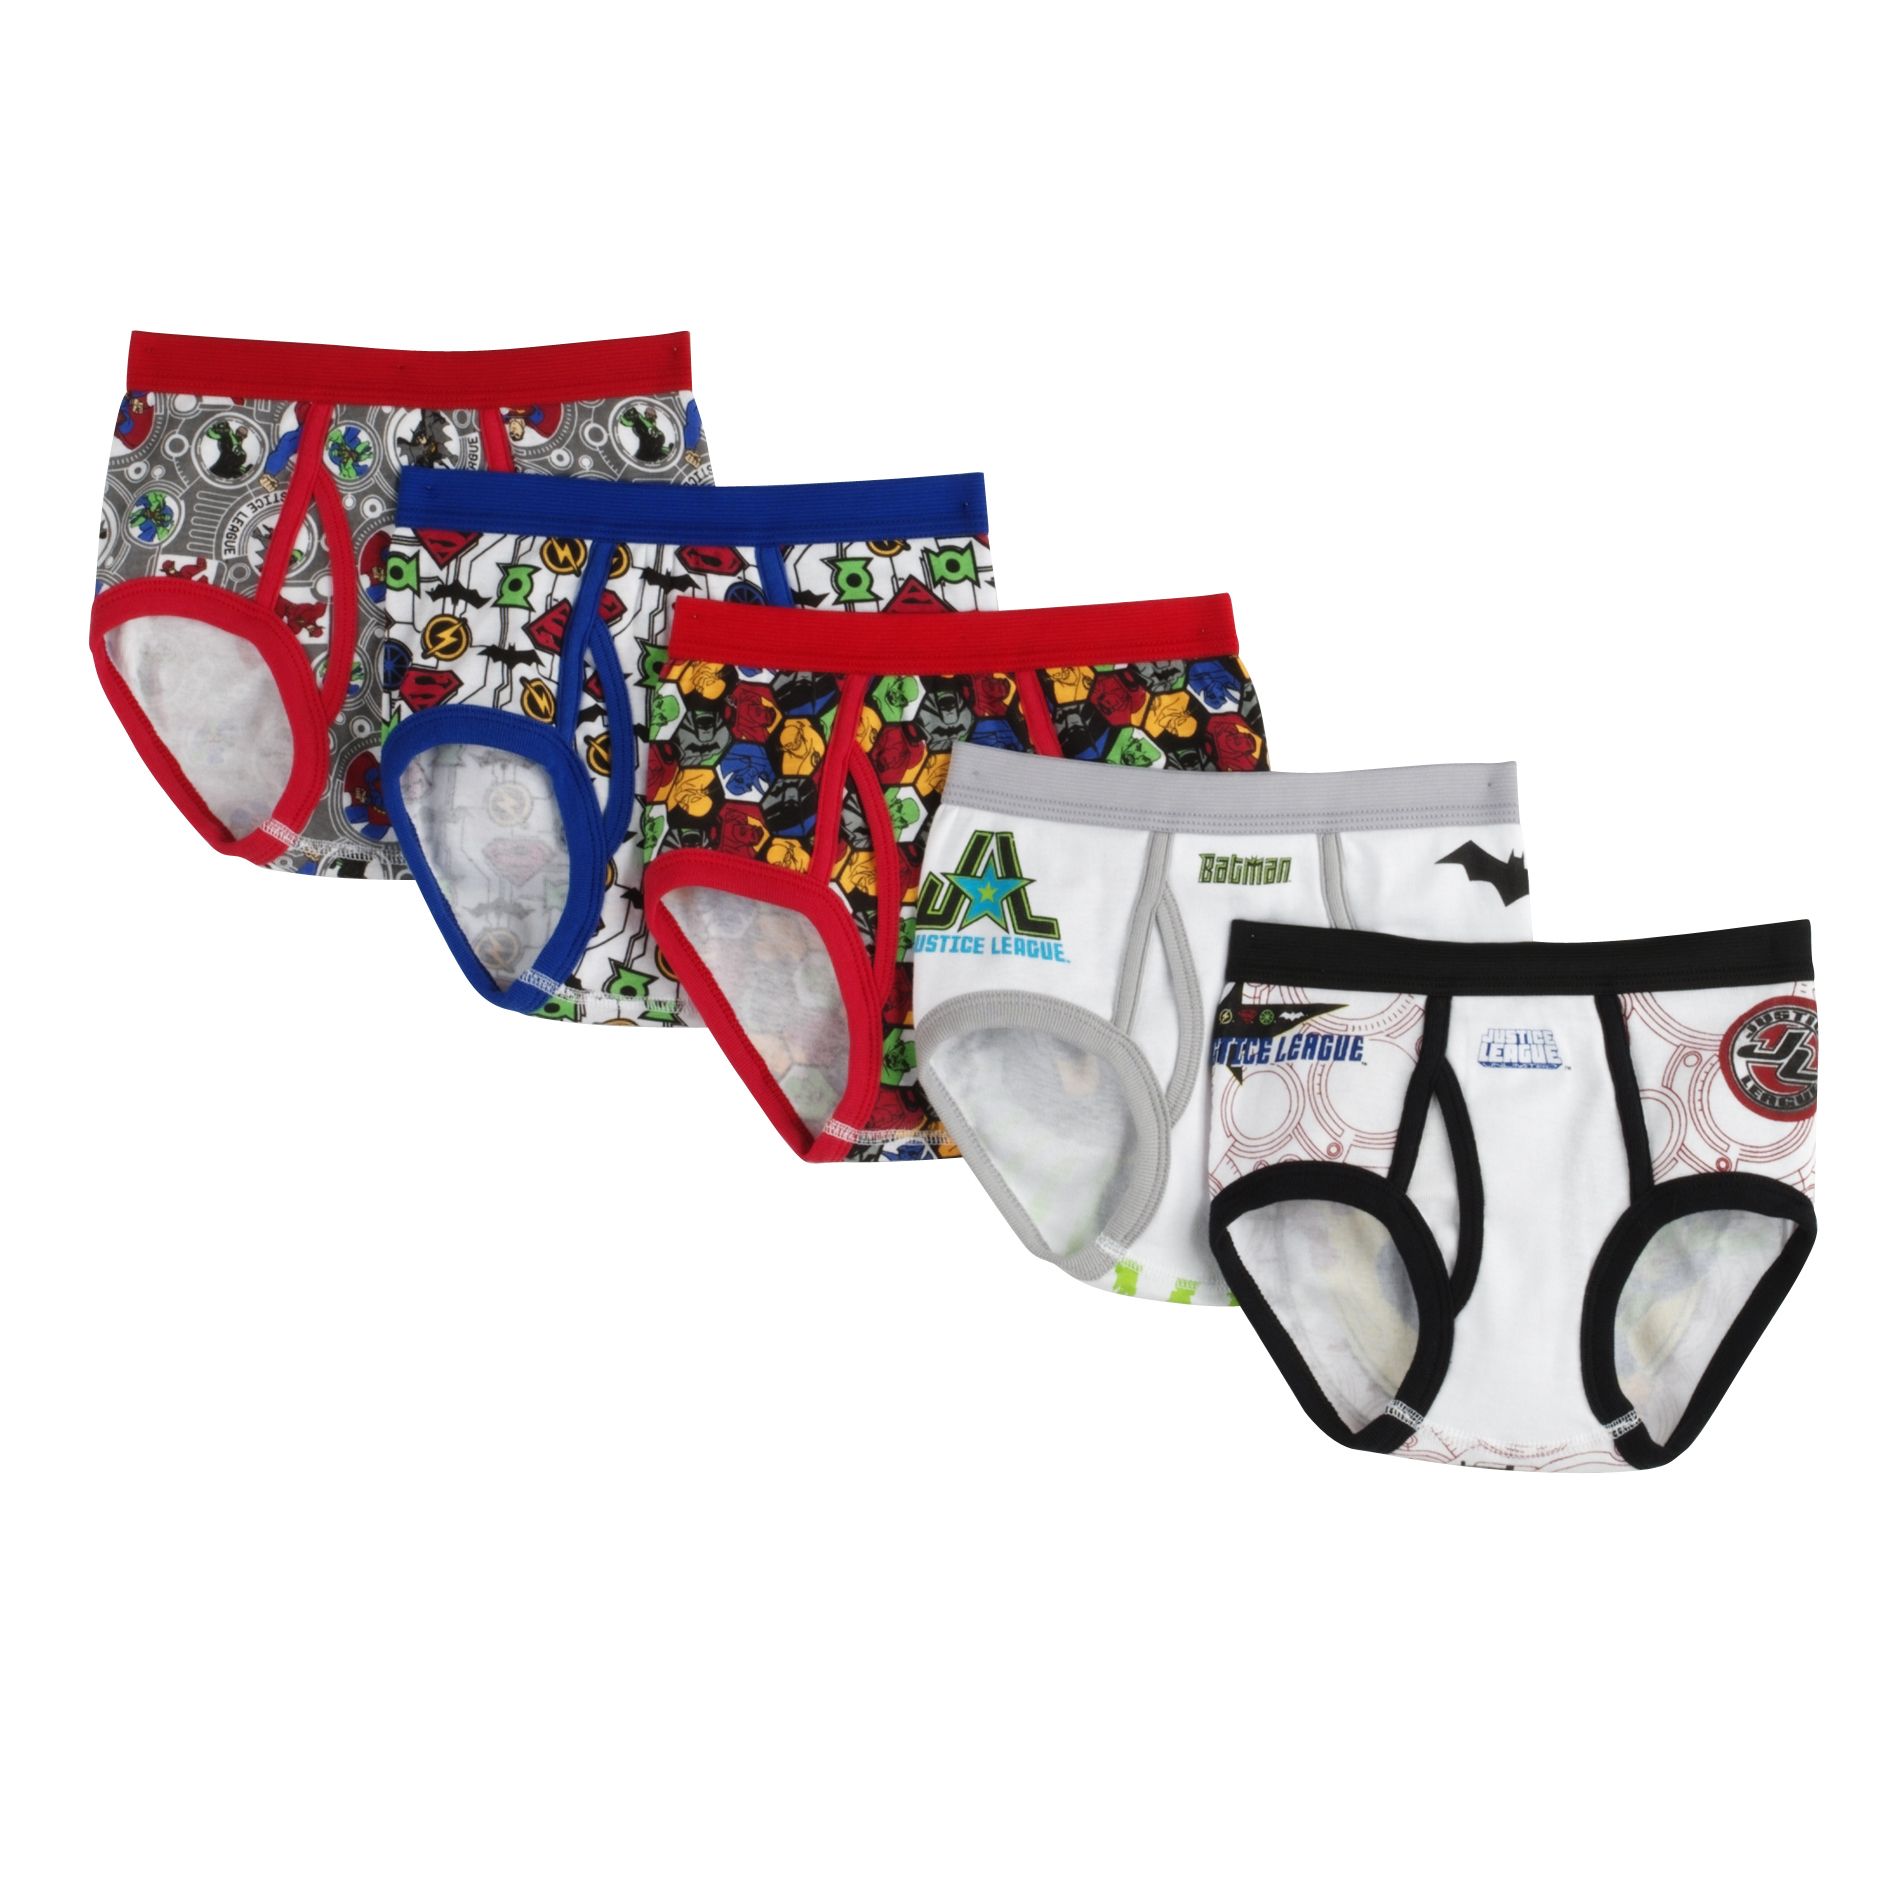 UPC 045299001369 product image for Warner Brothers Boy's Justice League 5 Pair Briefs Prints May Vary | upcitemdb.com